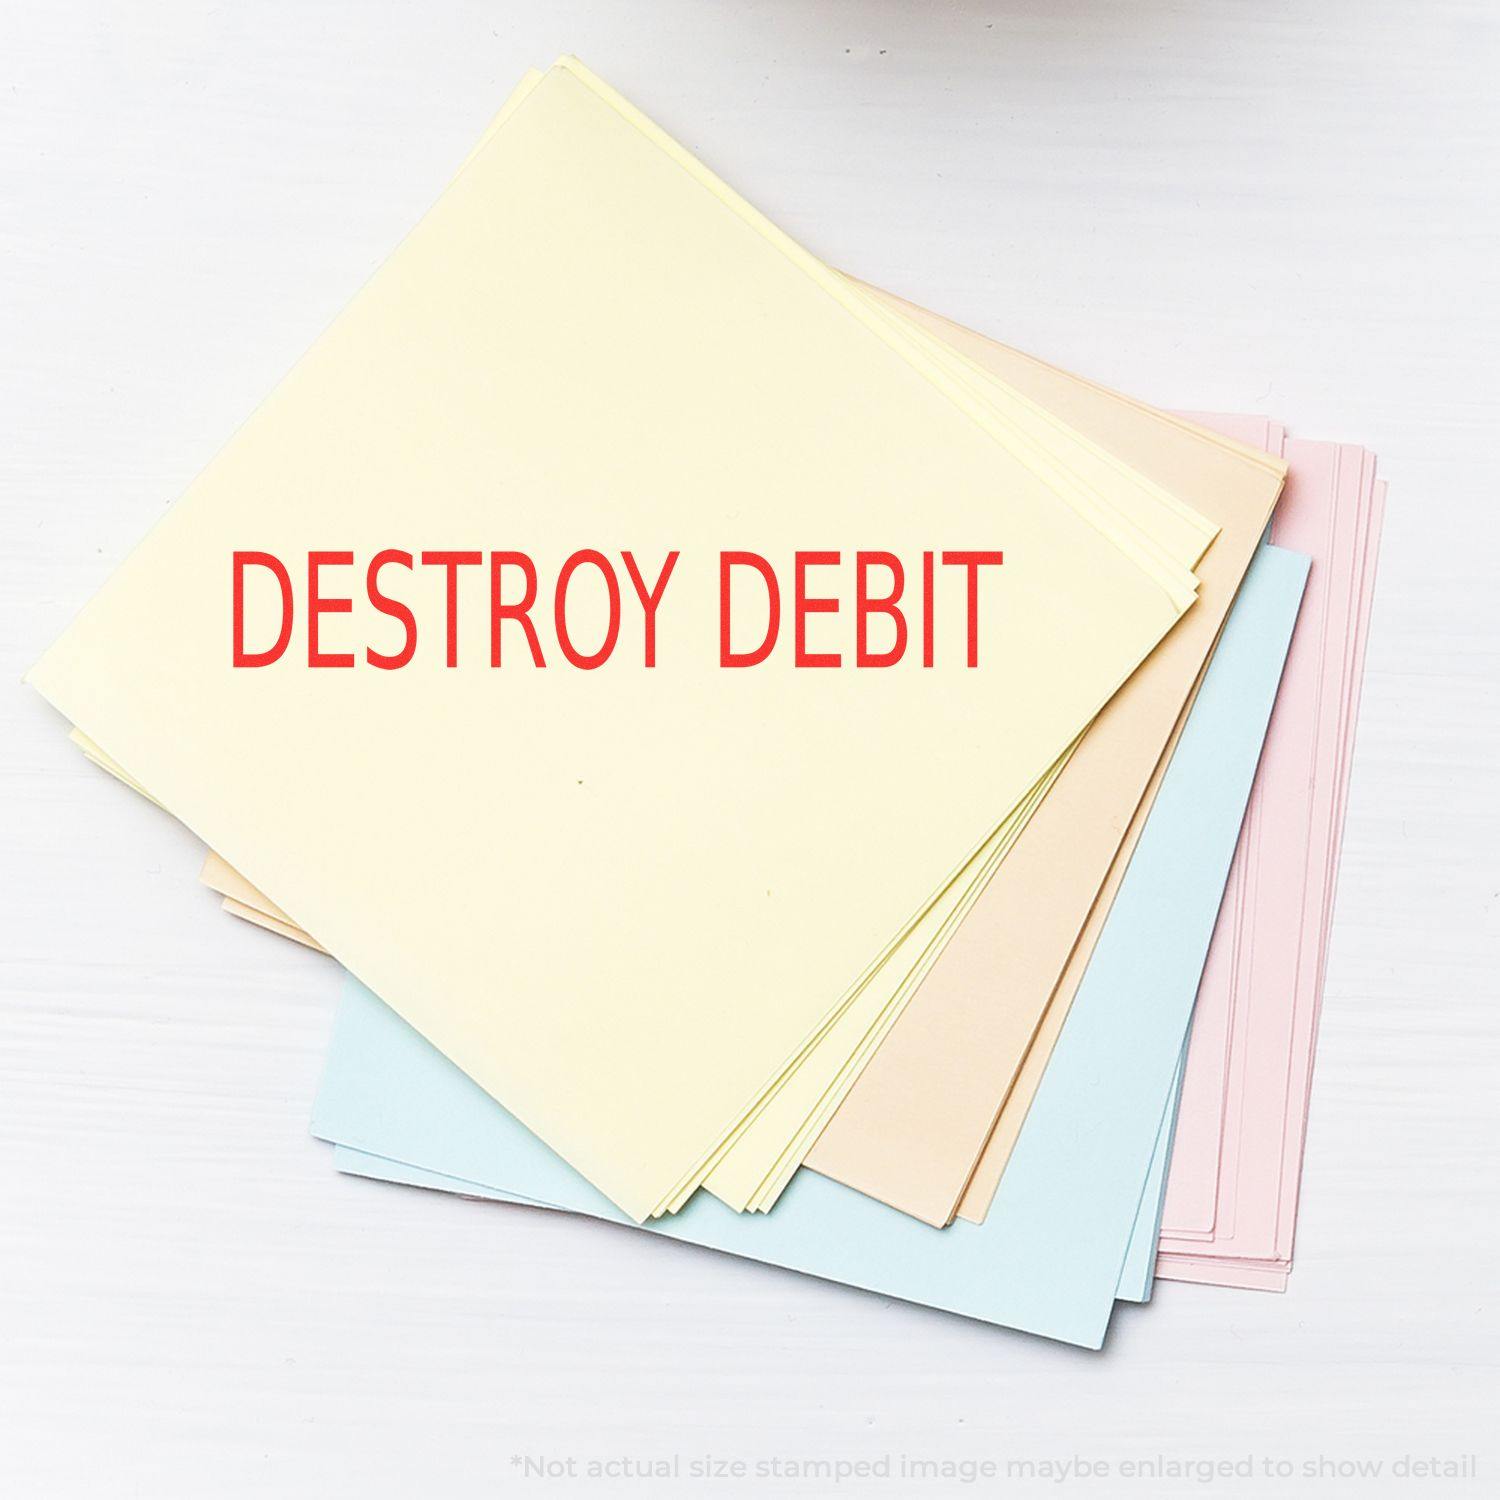 A self-inking stamp with a stamped image showing how the text "DESTROY DEBIT" in a large bold font is displayed by it.